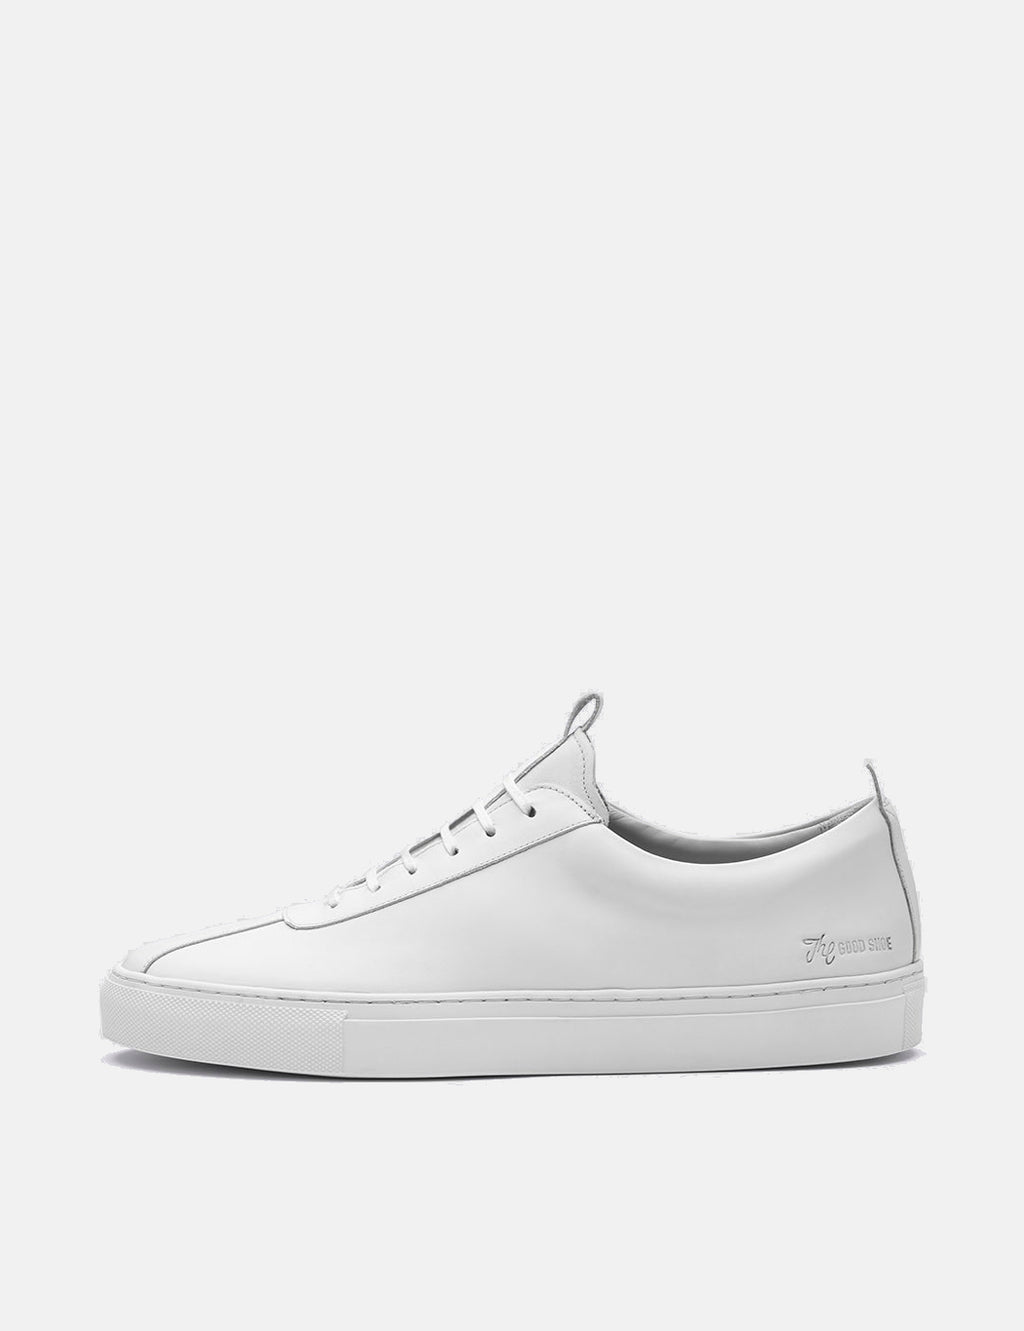 Grenson Sneakers 1 - White | UrbanExcess.com – URBAN EXCESS